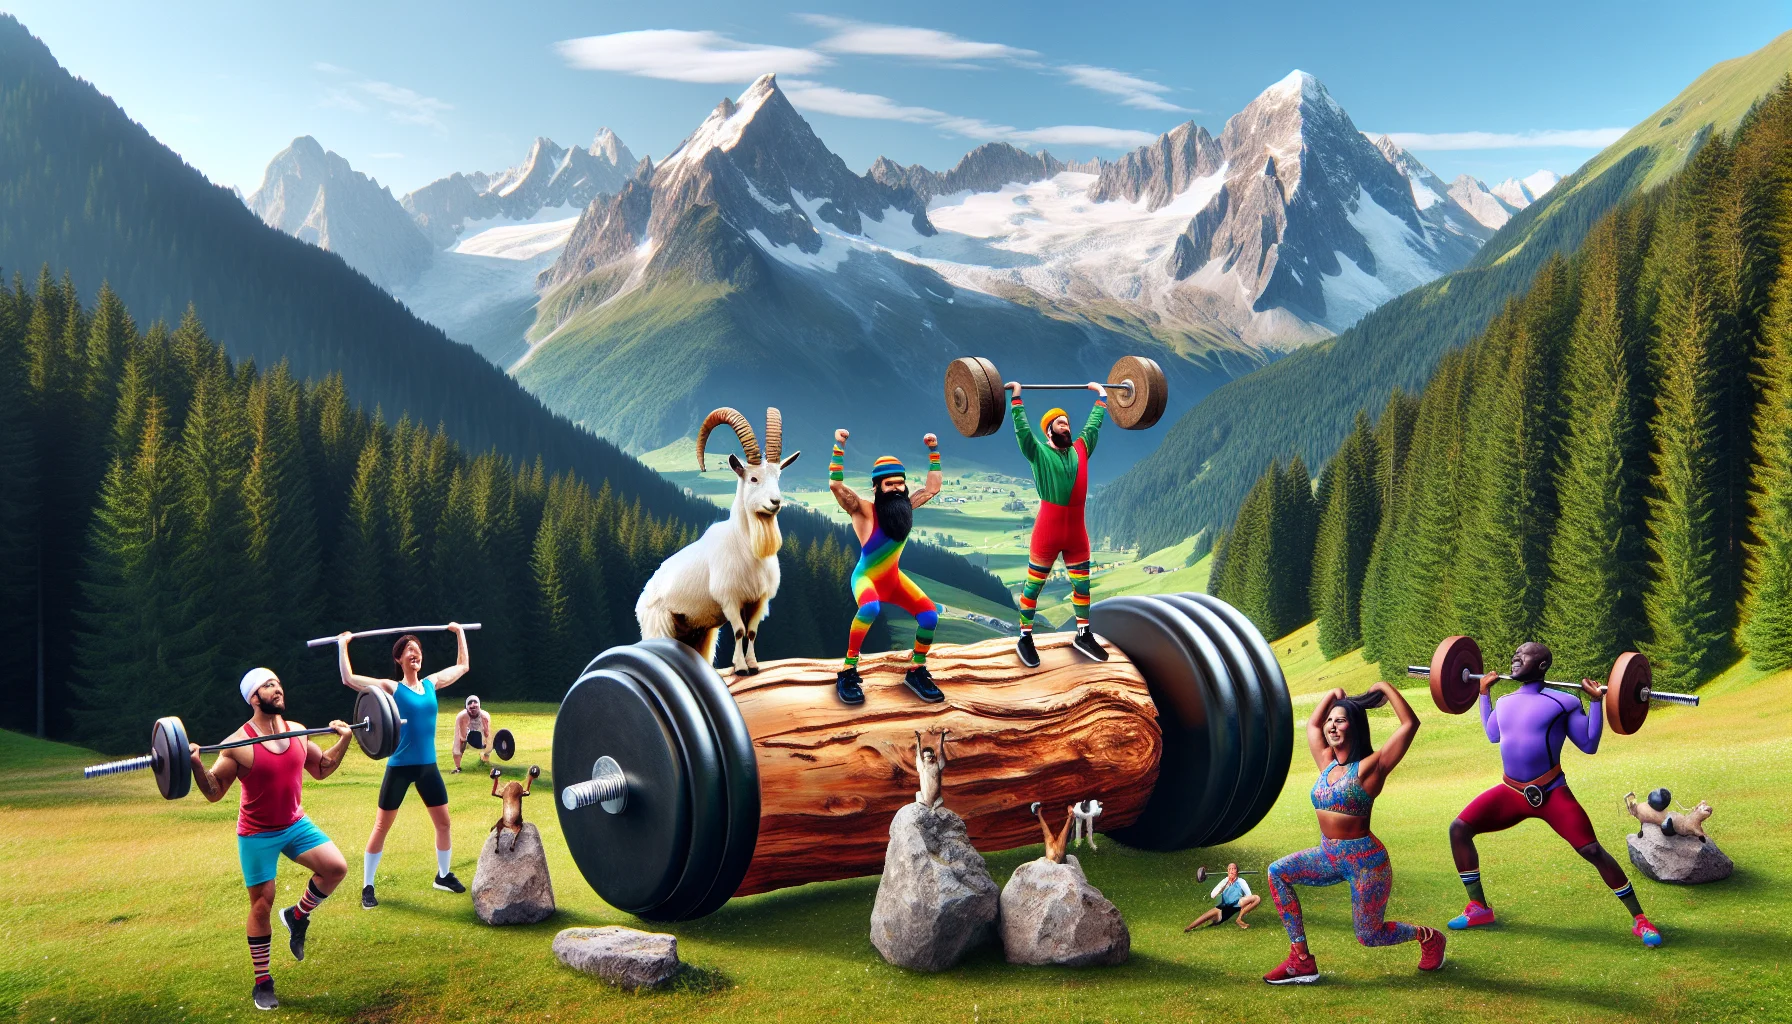 Create a humorous scene that encourages wellness and physical exercise. Picture a scenic Alpine landscape with towering snow-capped mountains and sprawling, lush green valleys. In the foreground, imagine a barbell made from a large, distinctive pine log, with two colossal boulders as weights at each end. Detail a group of different people animatedly attempting to lift the hefty makeshift barbell. Include individuals of varying descents, such as a Middle-Eastern woman, a South Asian man, an Hispanic man and a Black woman, all in vivid exercise gear. Amplify the humor with a mountain goat in fitness attire, acting as their enthusiastic coach.